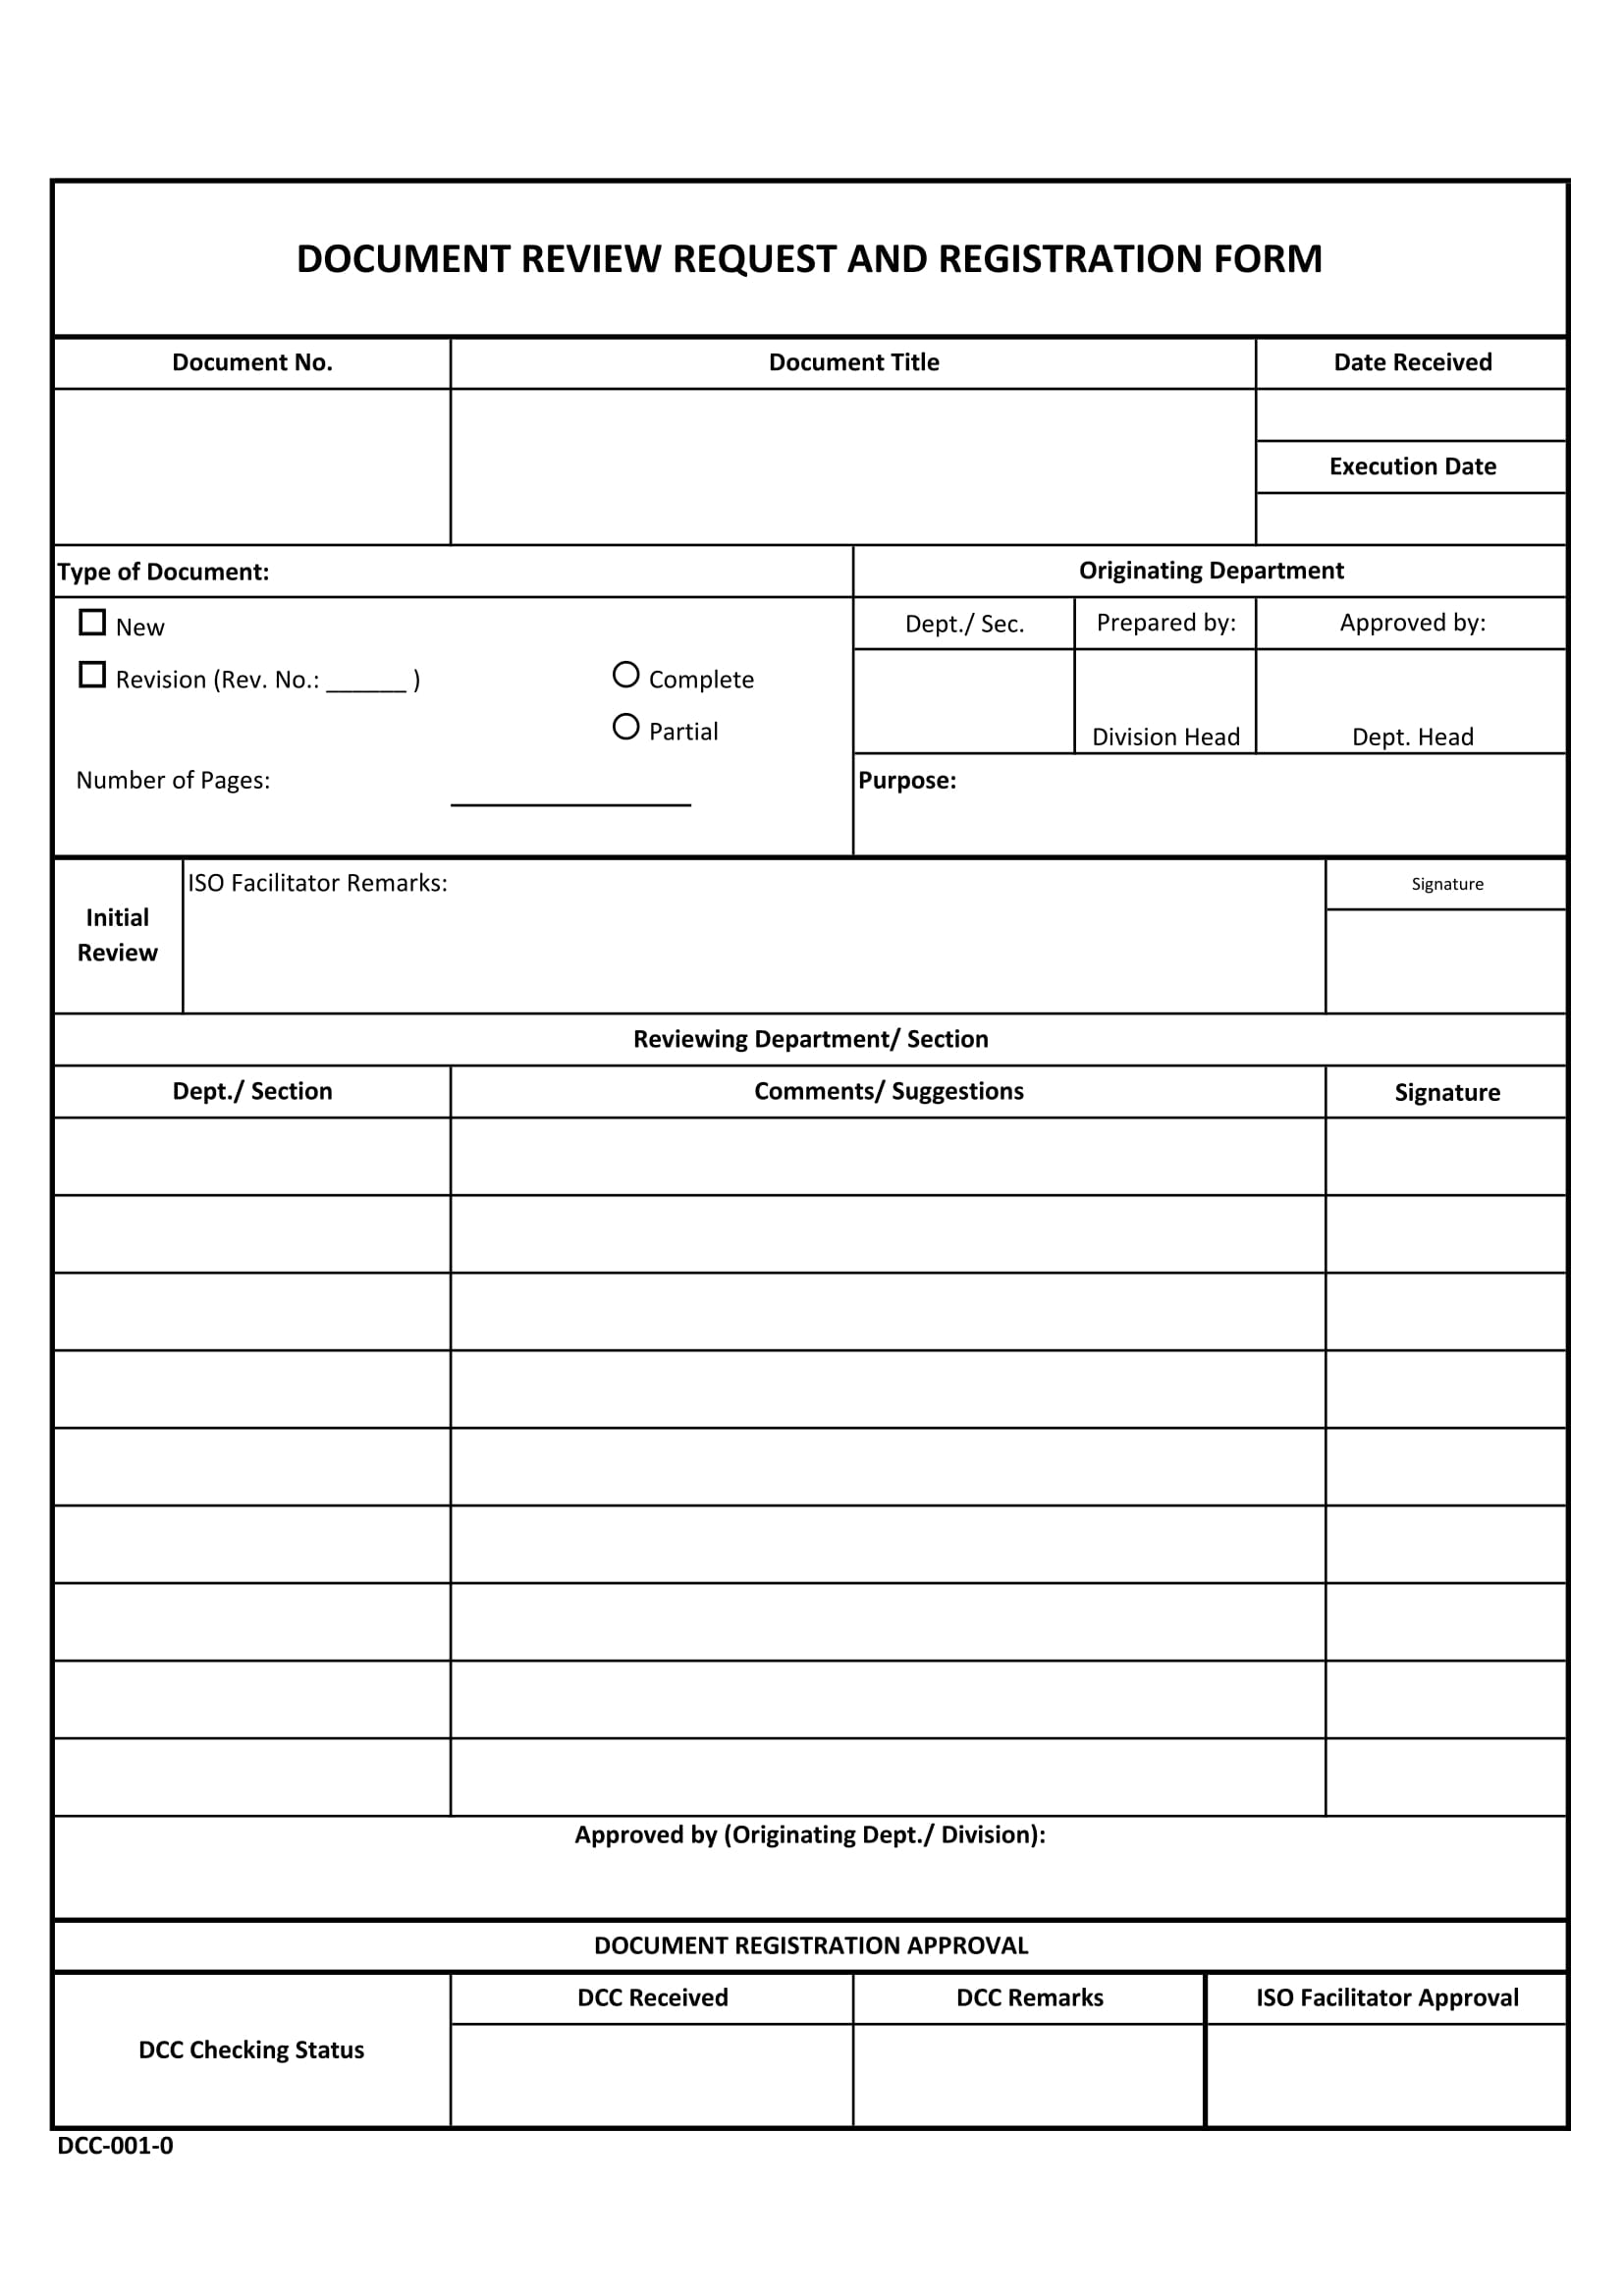 document review request and registration form 1